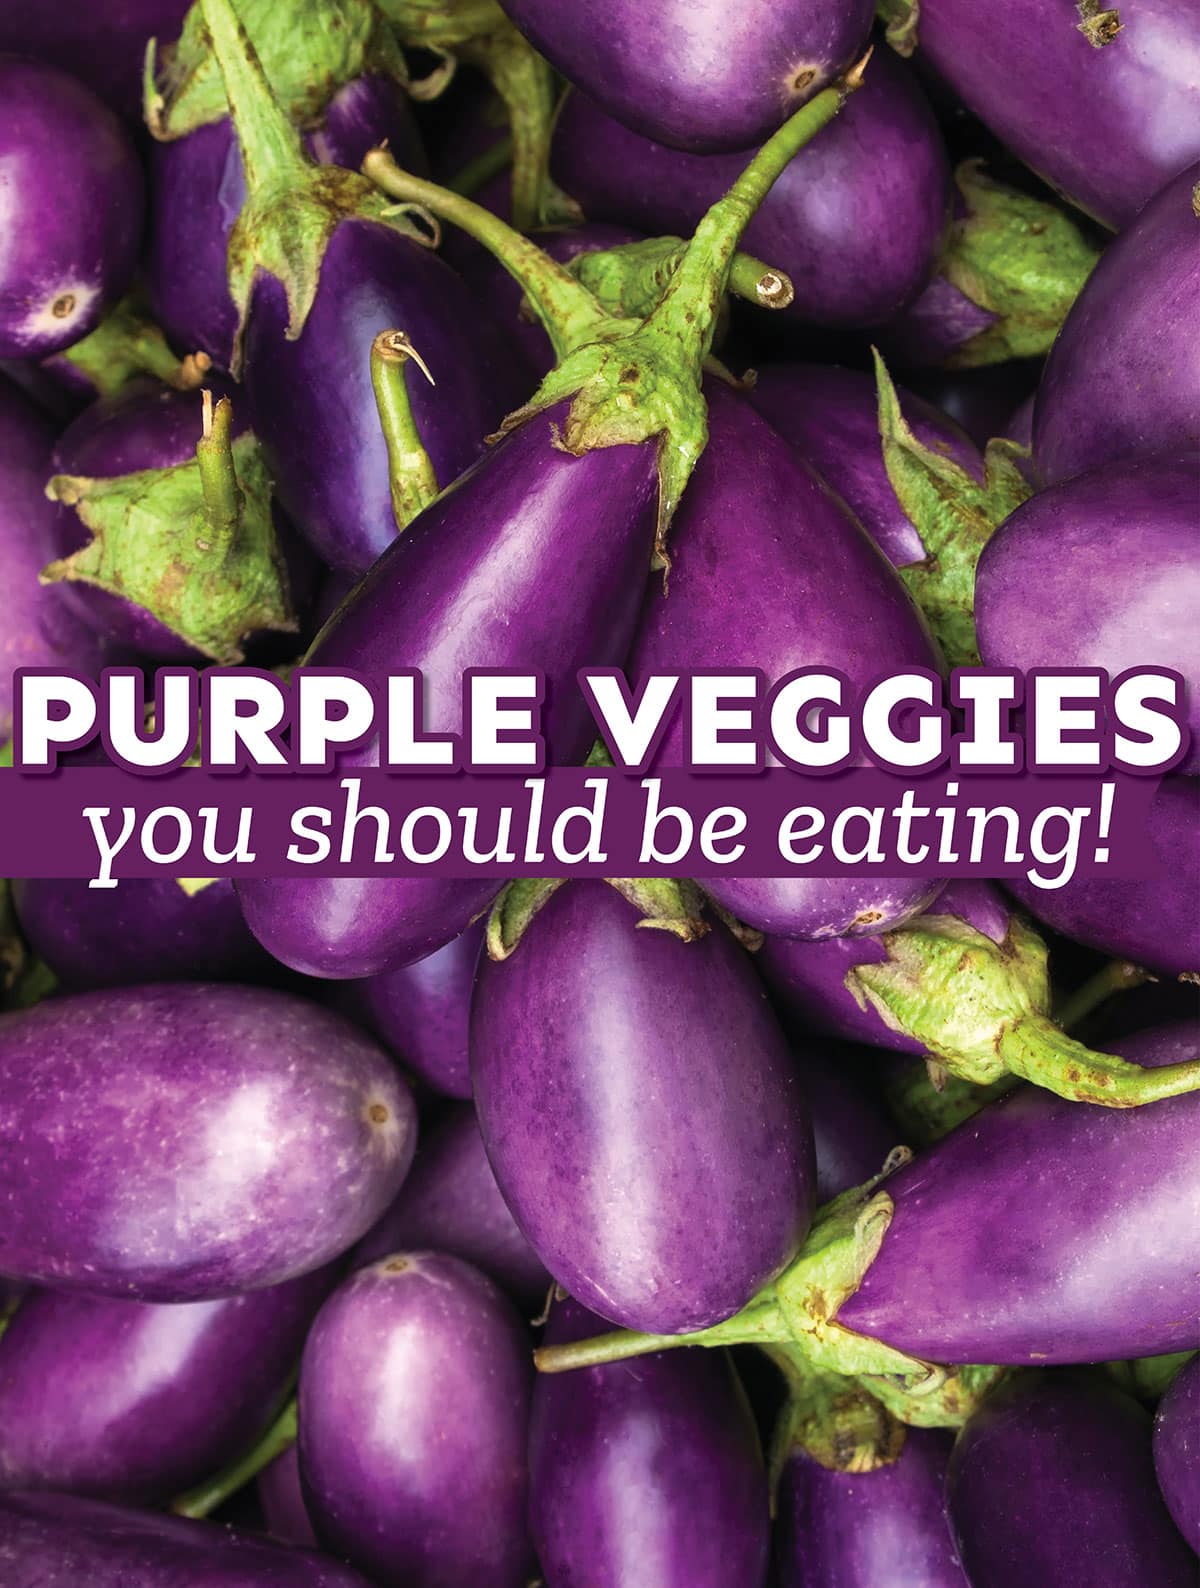 Collage that says "purple vegetables".